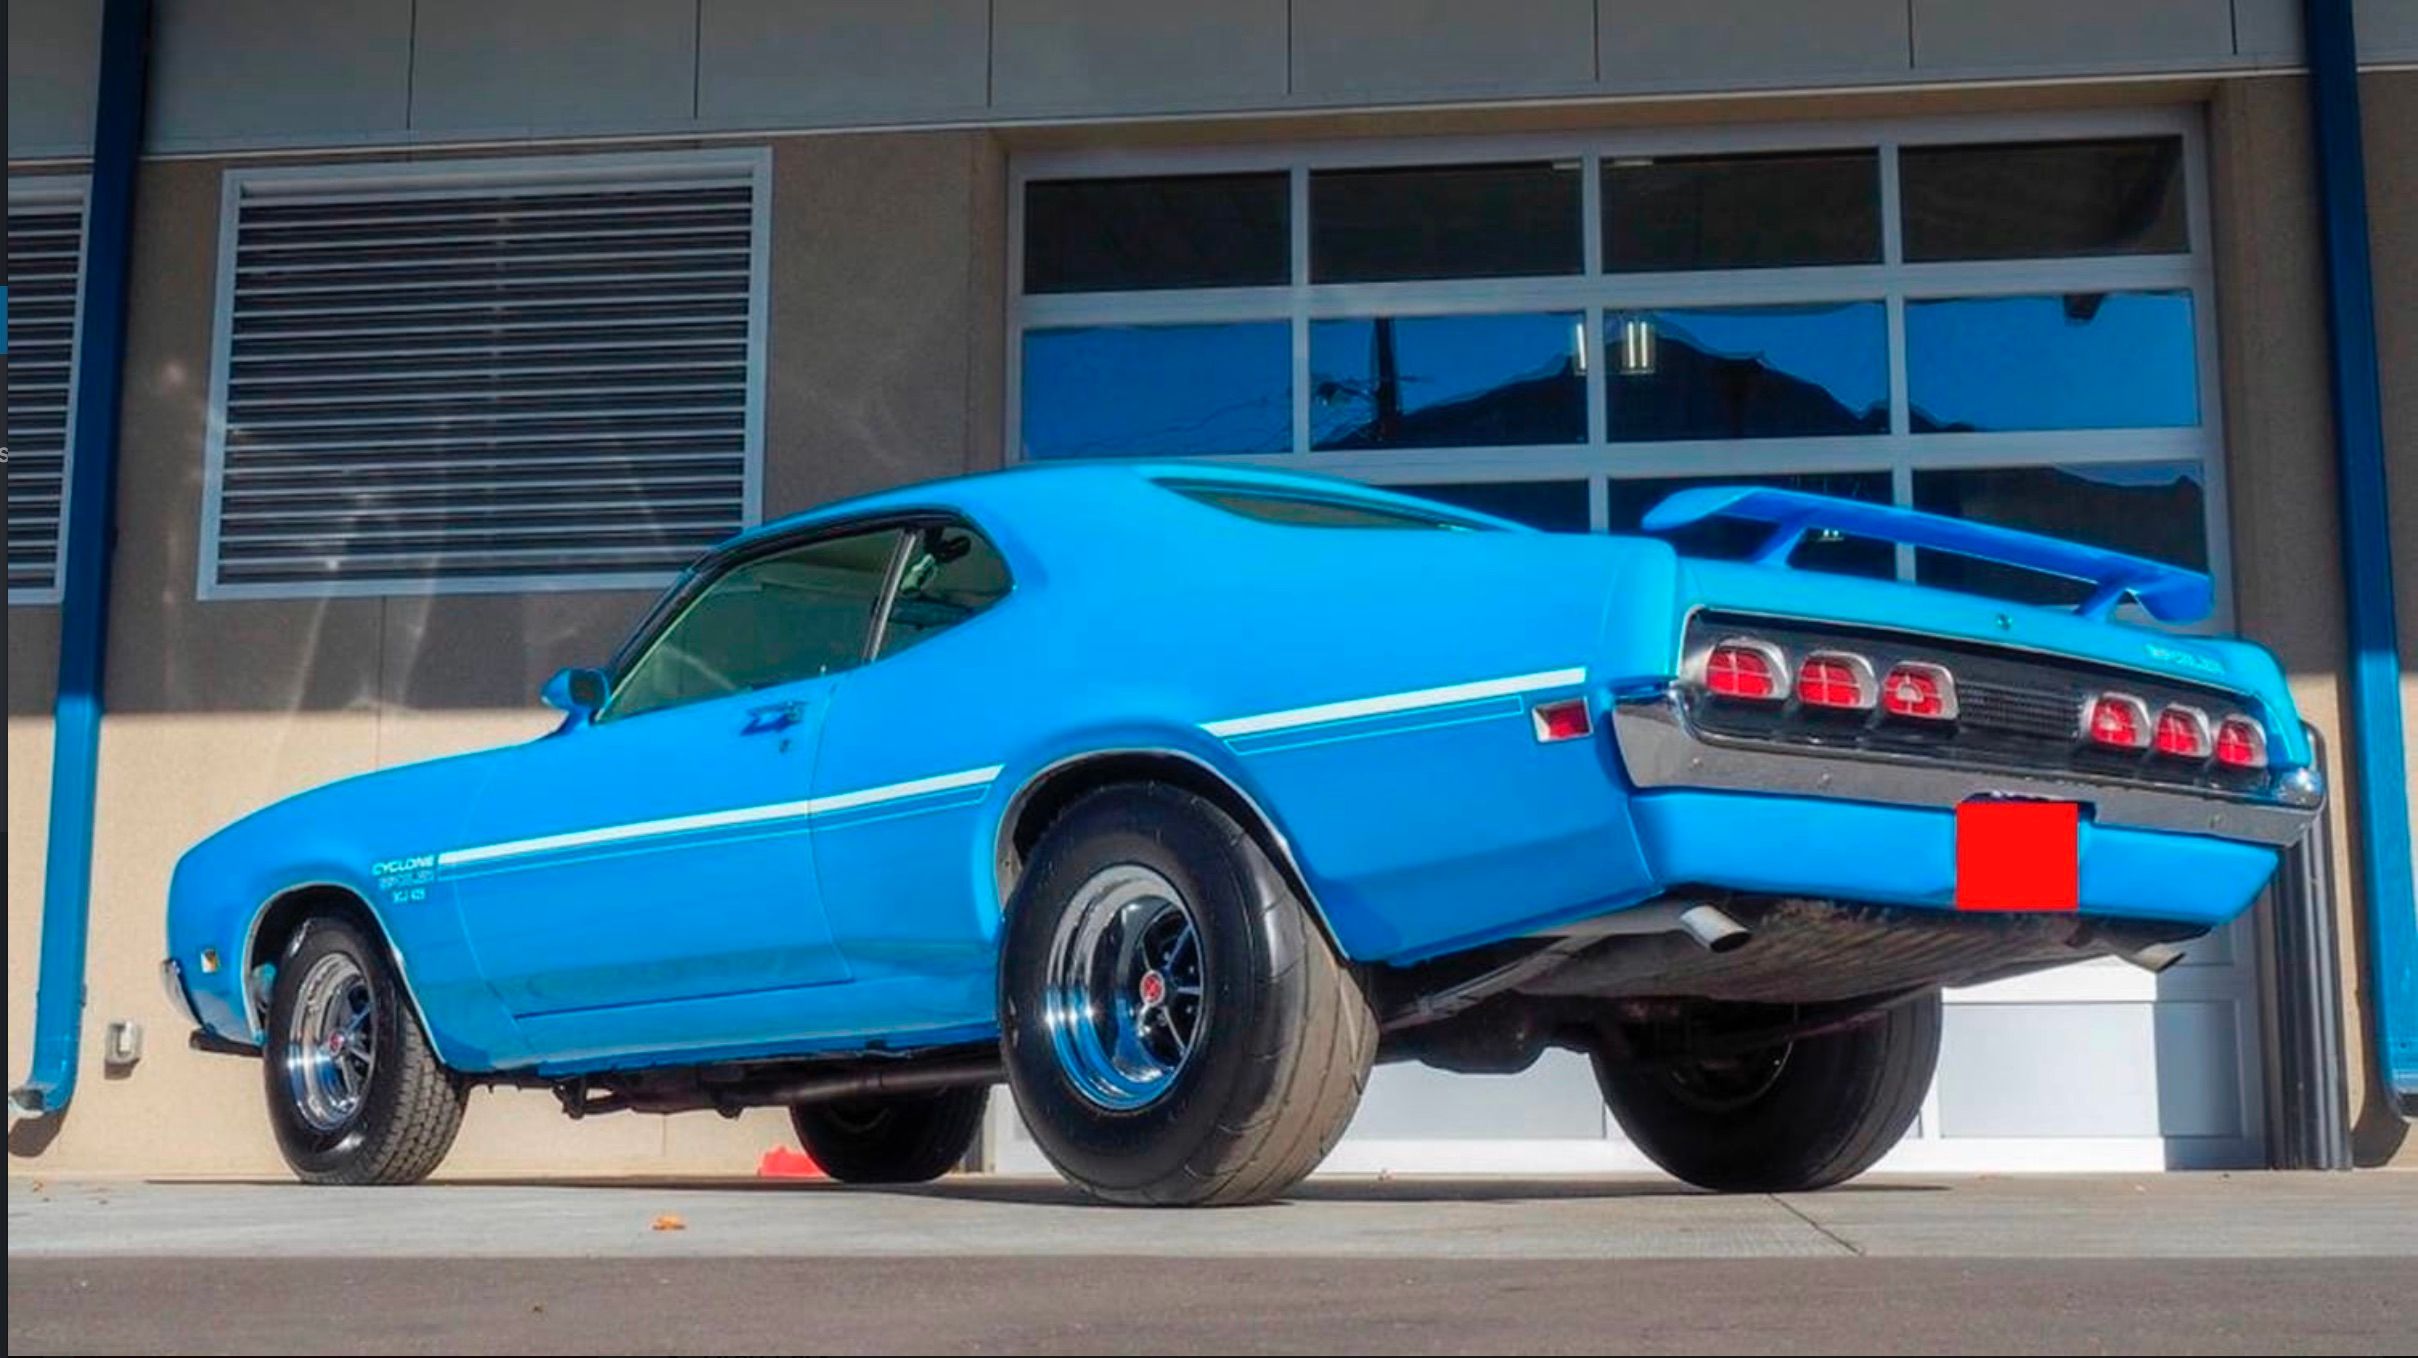 Ranking The 10 Most Badass Muscle Cars Of The '70s | HotCars